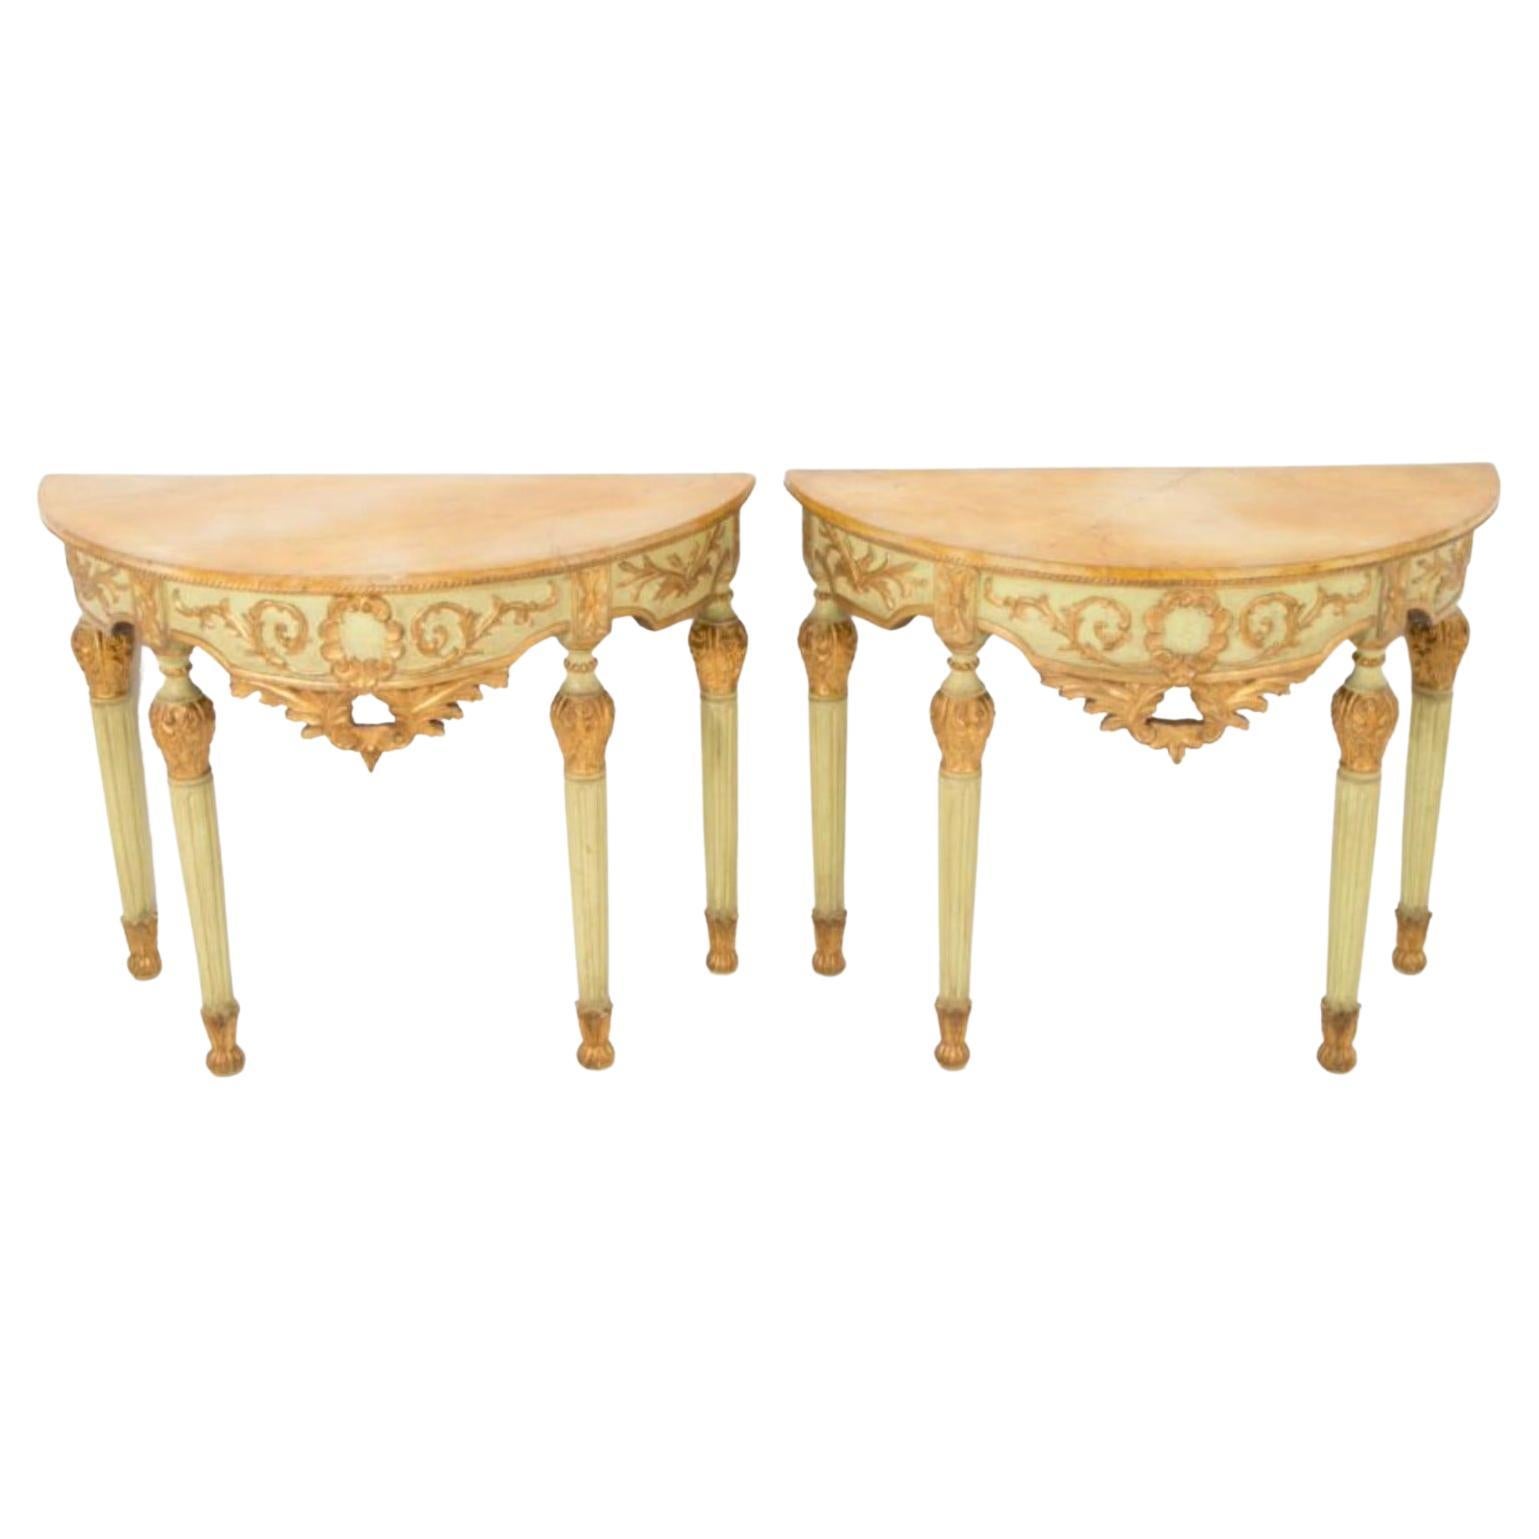 Pair of 19th Century Italian Console Tables